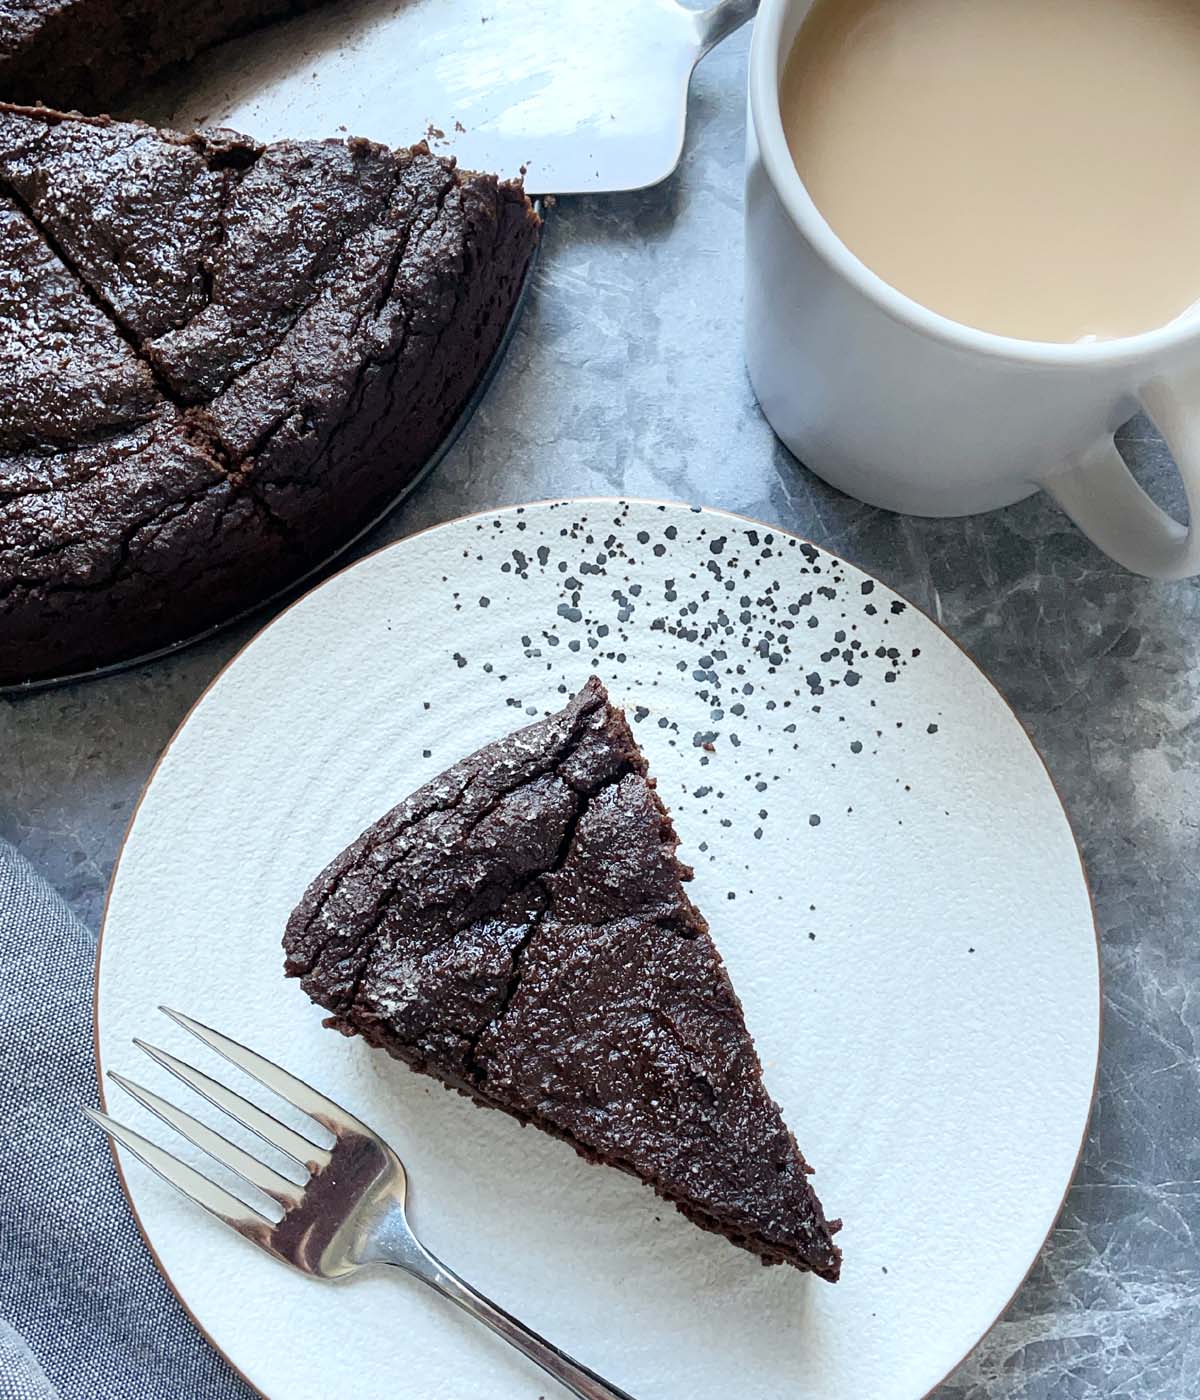 A wedge of dark brown cake on a white plate with a fork next to a cup of tea and chocolate cake.